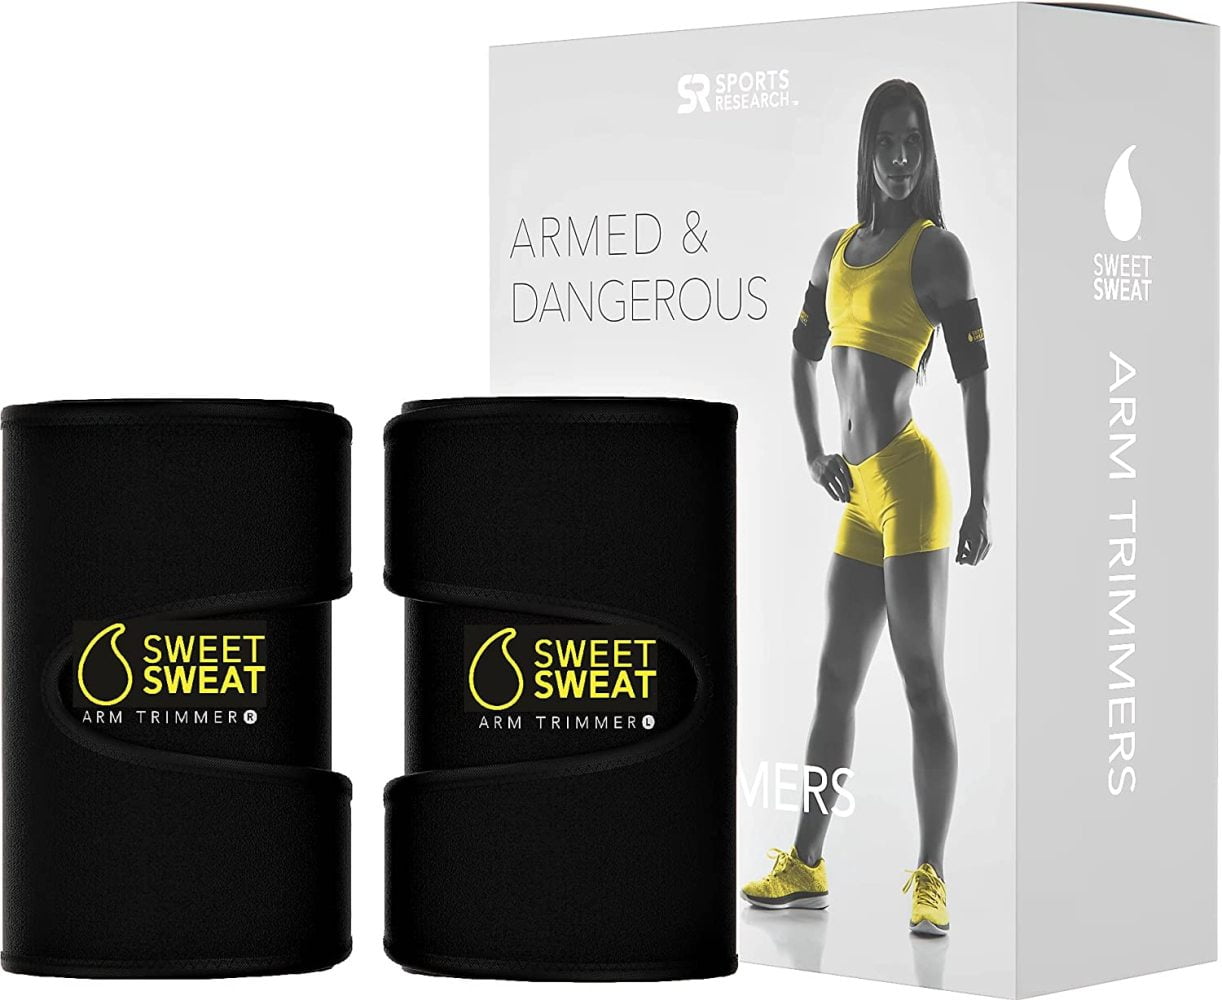 Includes Free Sample Of Sweet Sweat Sweet Sweat Arm Trimmers For Men And Women 